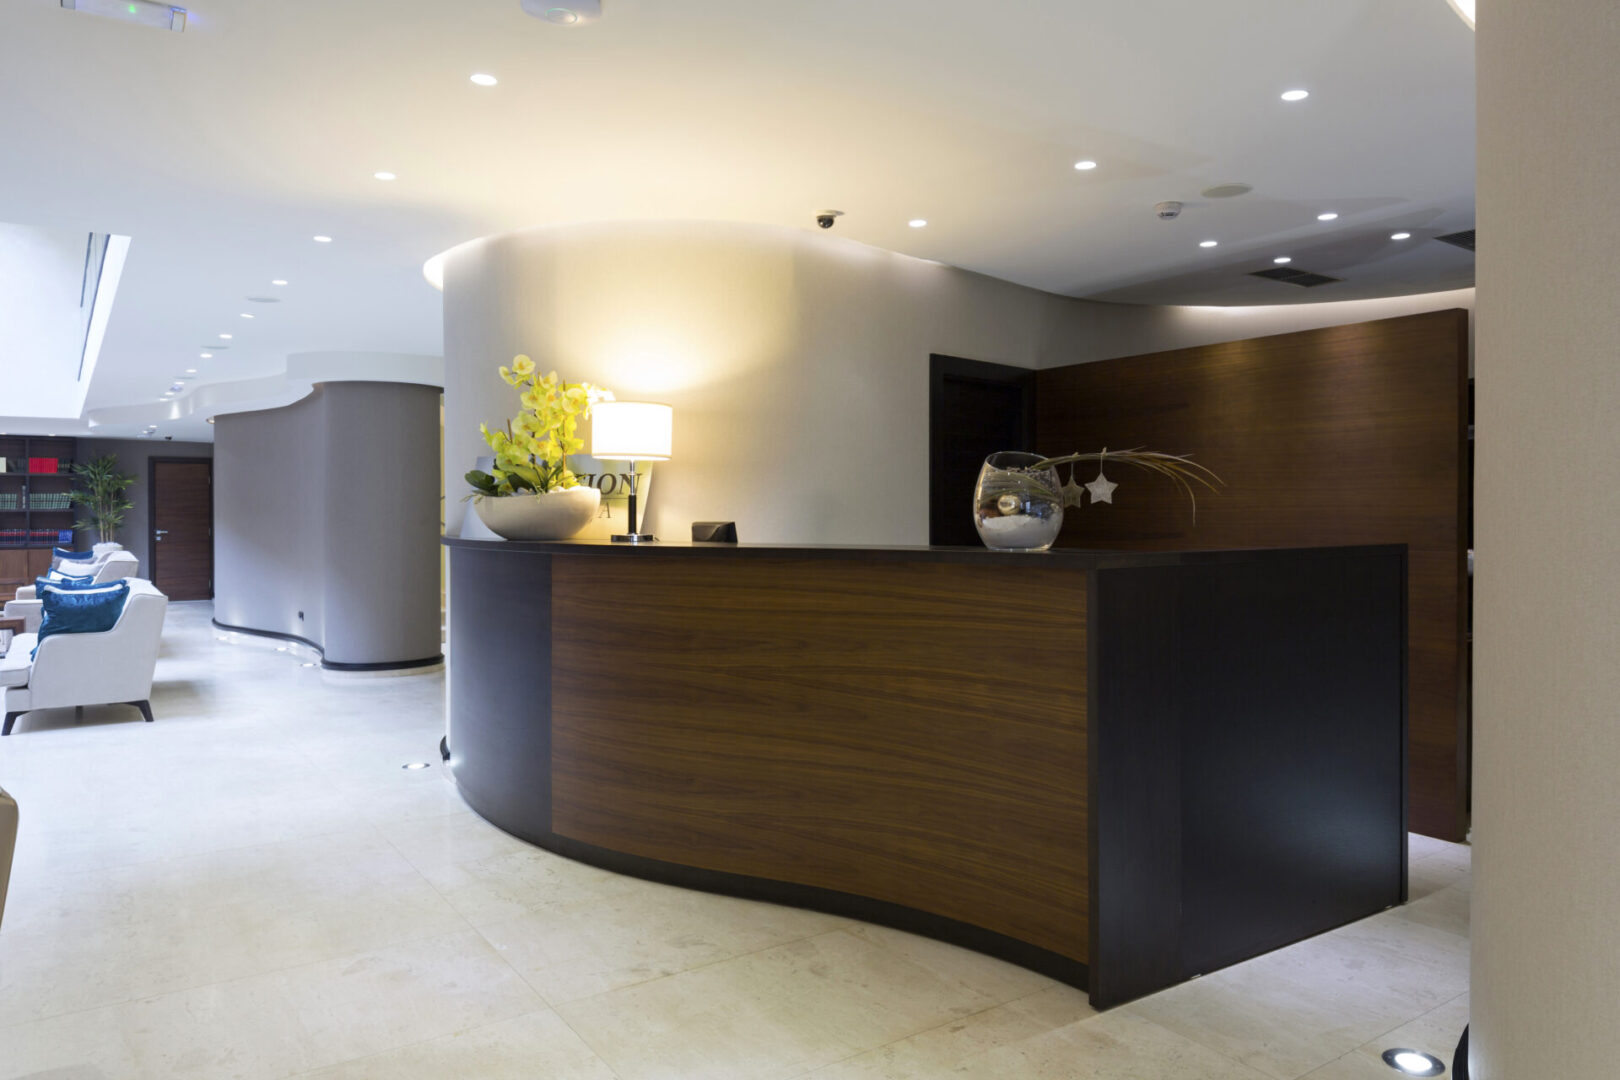 A reception desk with lights on the wall.